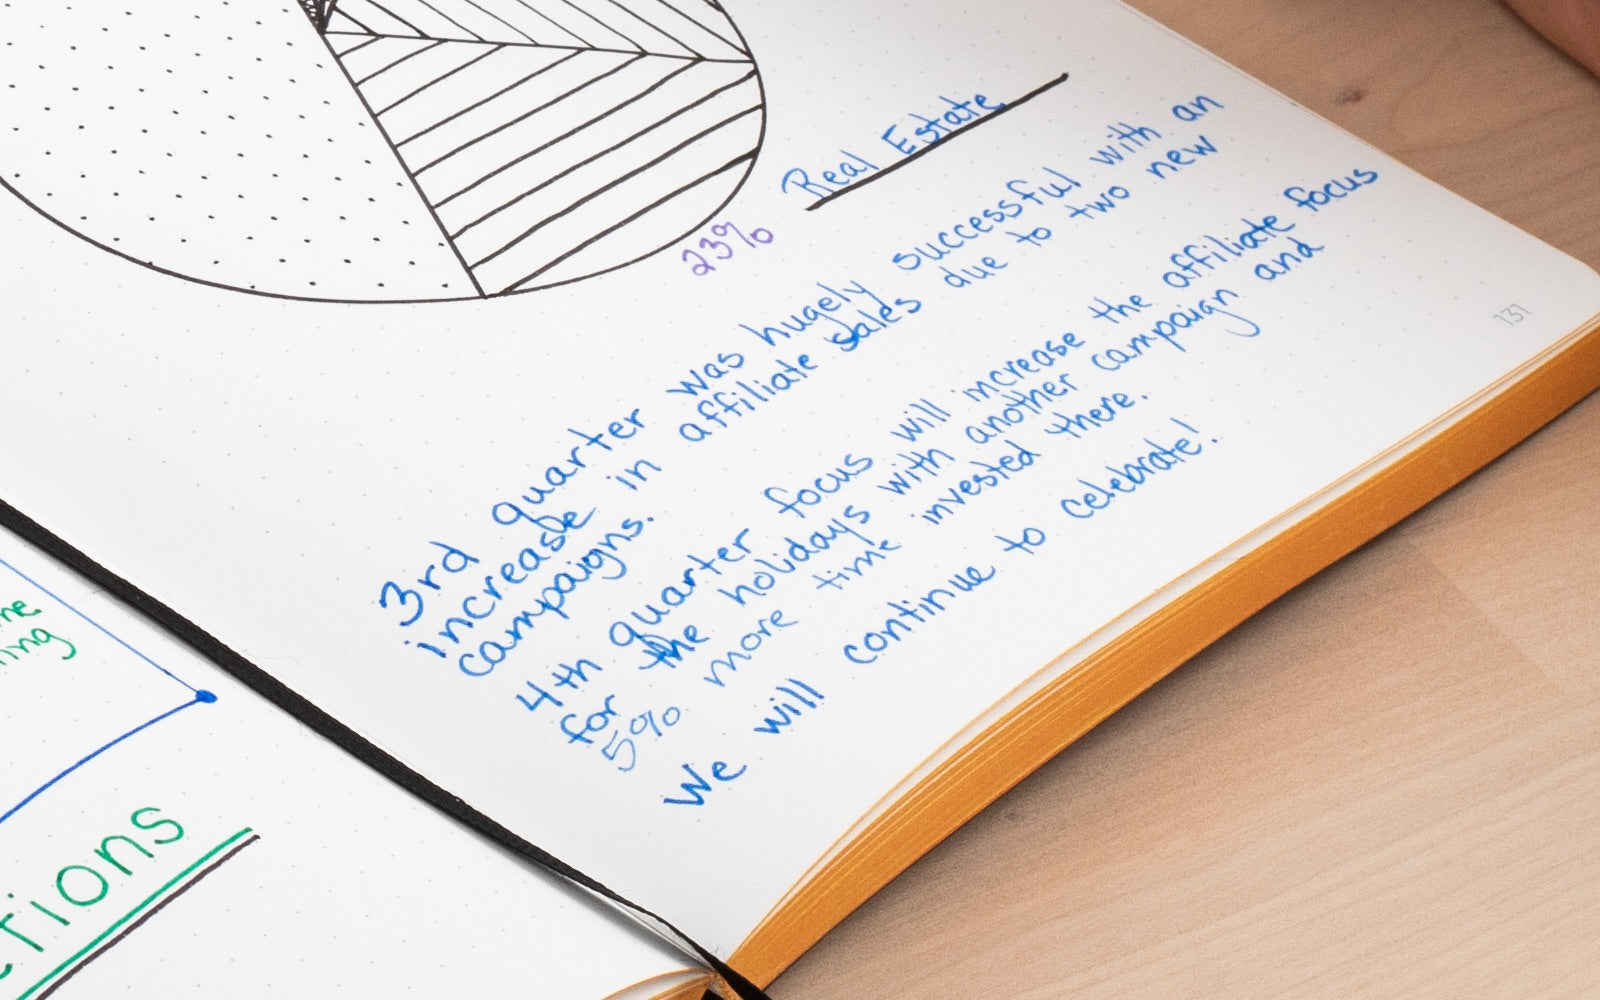 Search for your notes and ideas with the THINKERS App - included with your THINKERS Notebook. Quickly find your notes, concepts and illustrations with our advanced machine leaarning technology that automatically scans and transcribe your writing.